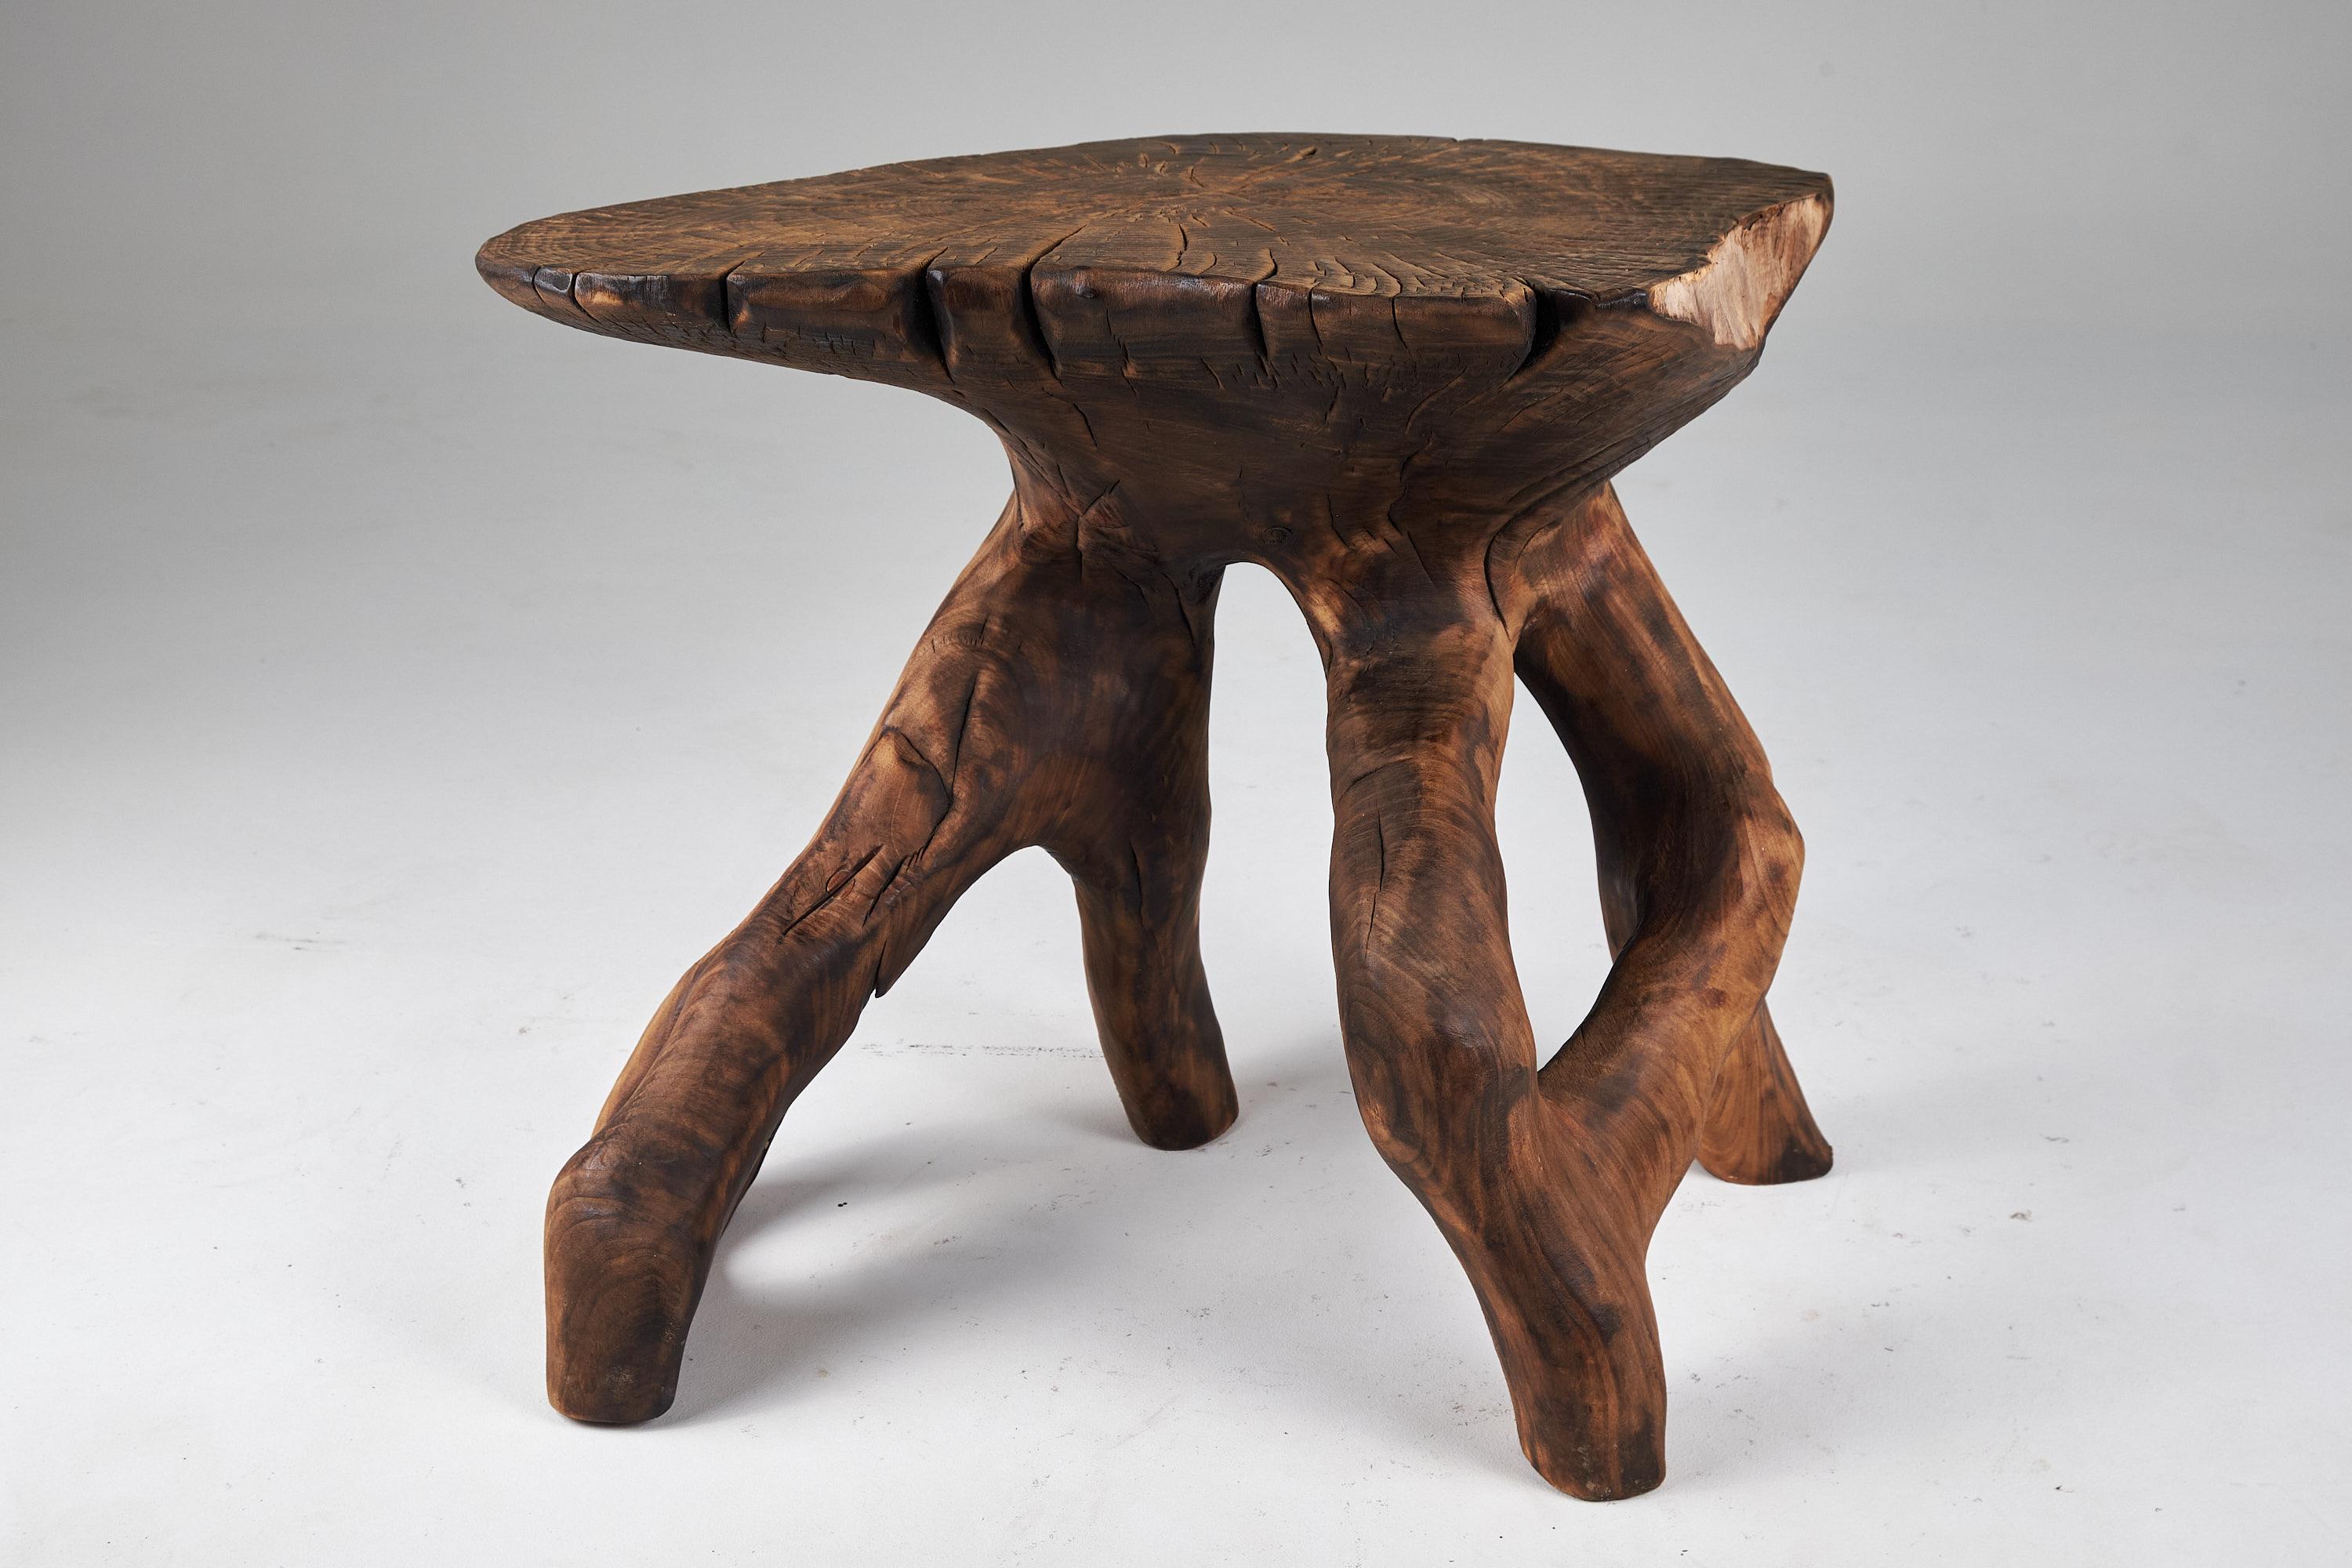 Domus is a coffee table made from a single block of wood.‎ The purpose of this coffee table is to be placed next to a warm hearth, a place where the whole family gathers and tells stories on long winter nights.‎ Functional sculpture carved from a